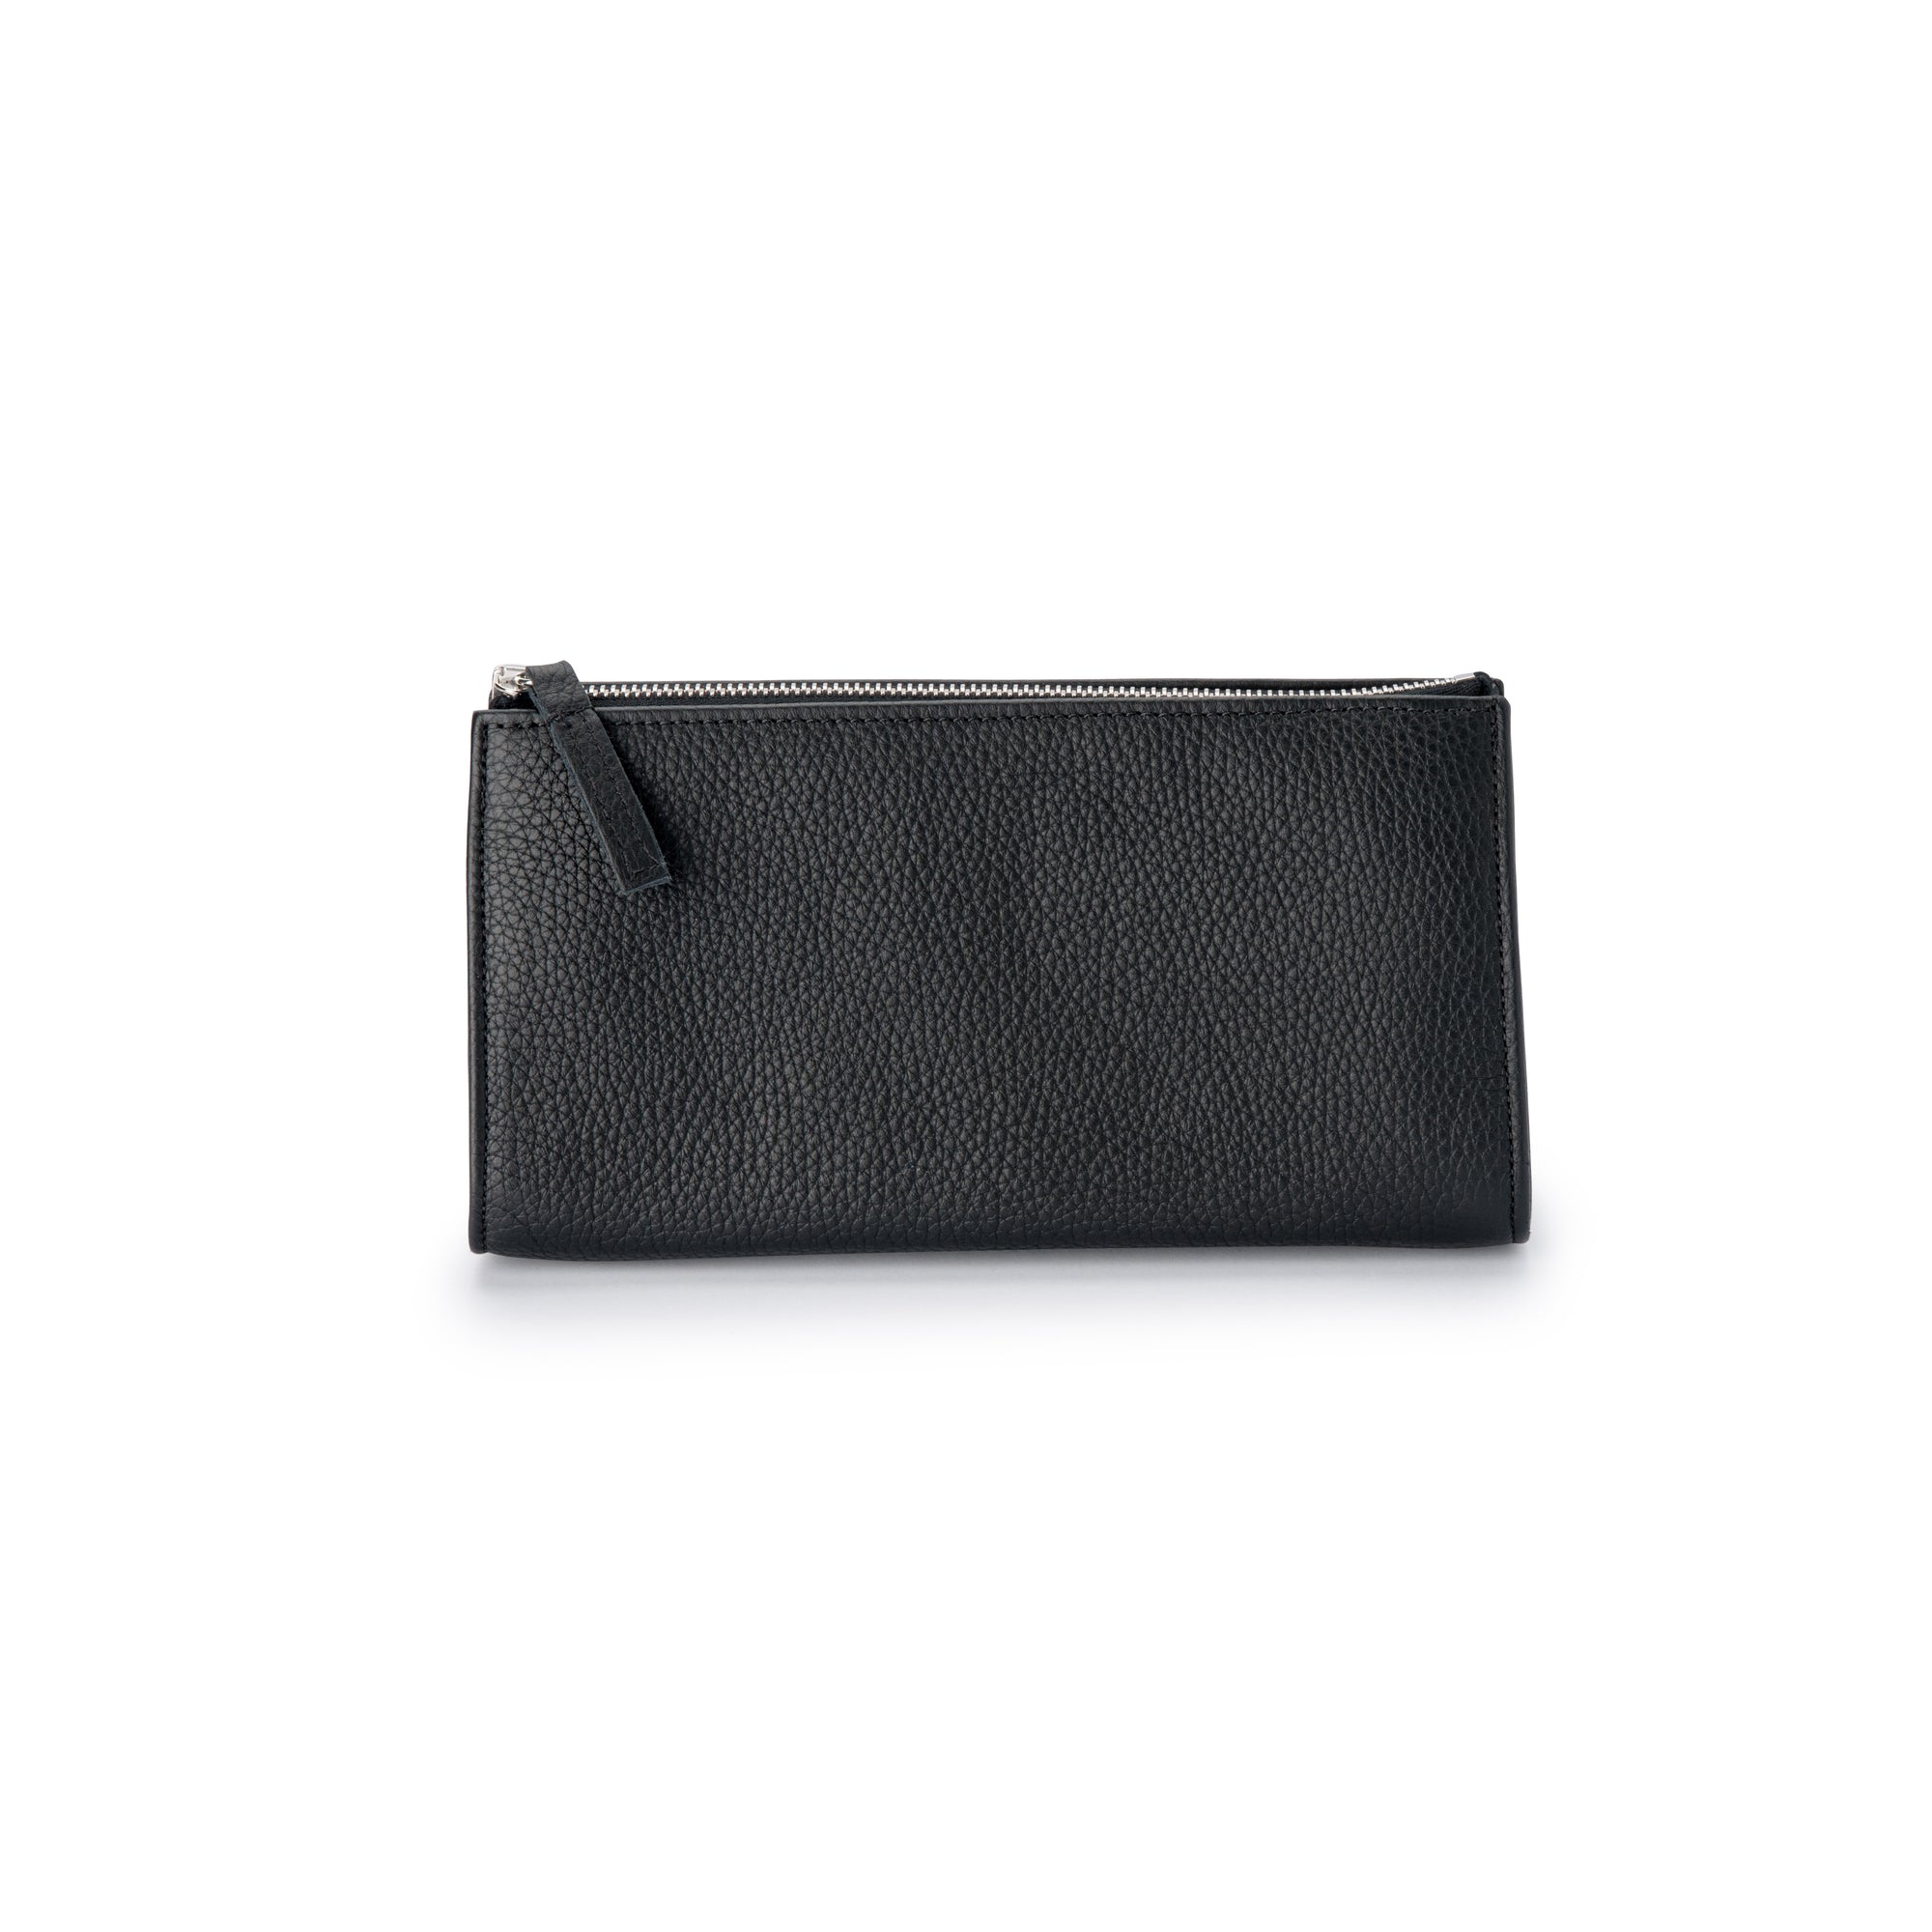 LIN8 unisex small bag for him and her. Made with genuine natural full grain taurillon leather imported from France. Wear it 3-ways as clutch, wristlet, long cross-body strap. Make, design, create your own bespoke leather bag today